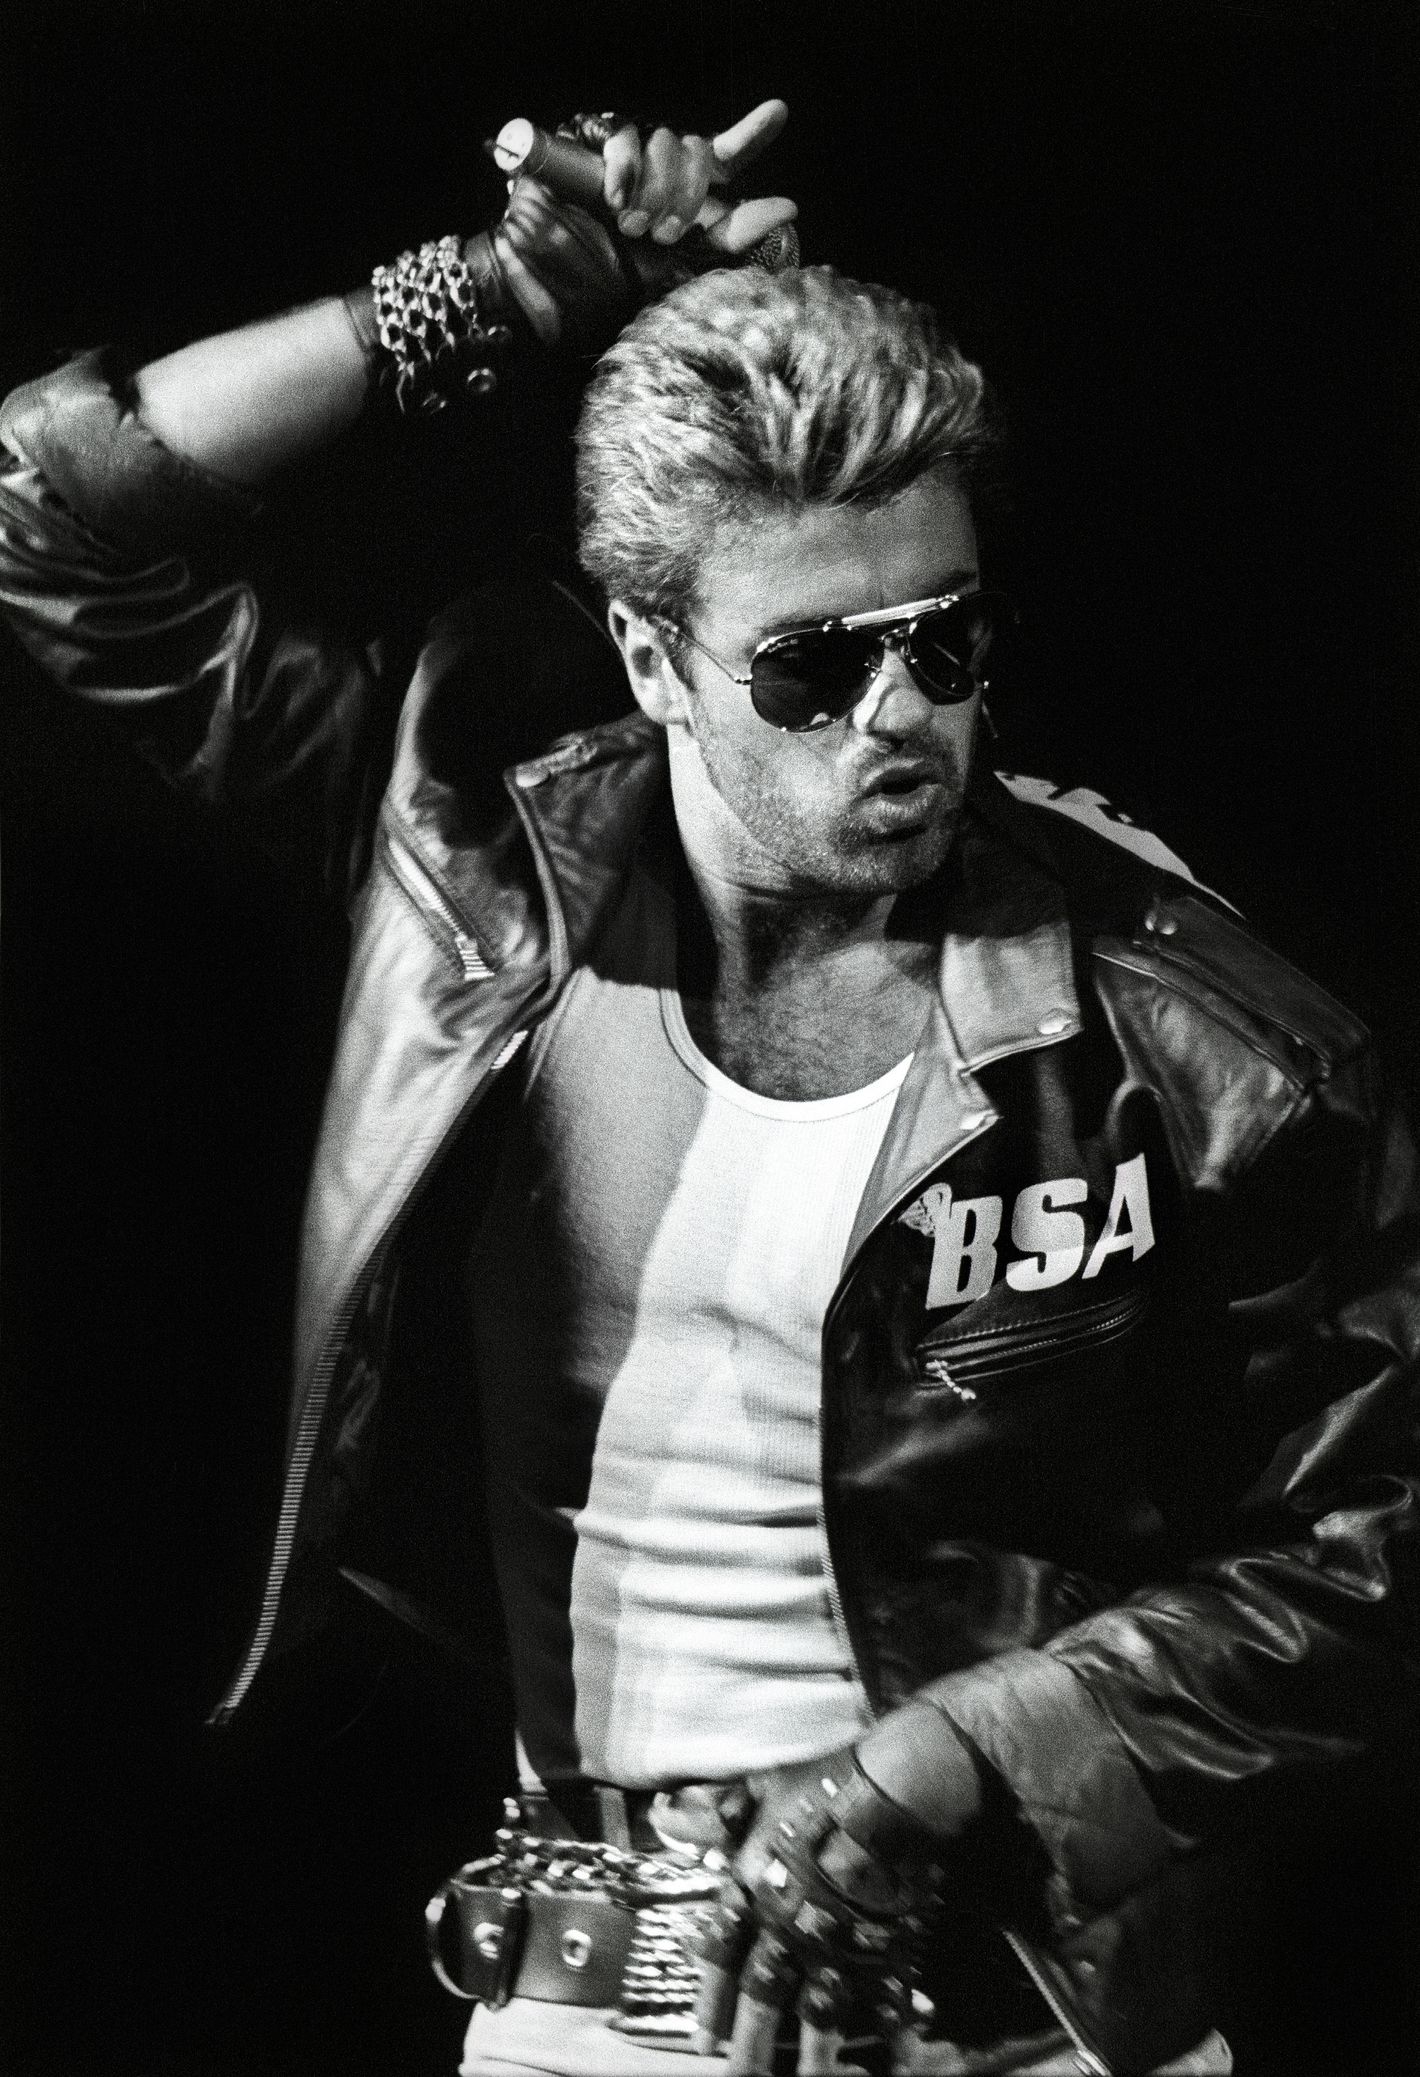 George Michael Was an Over-the-Top